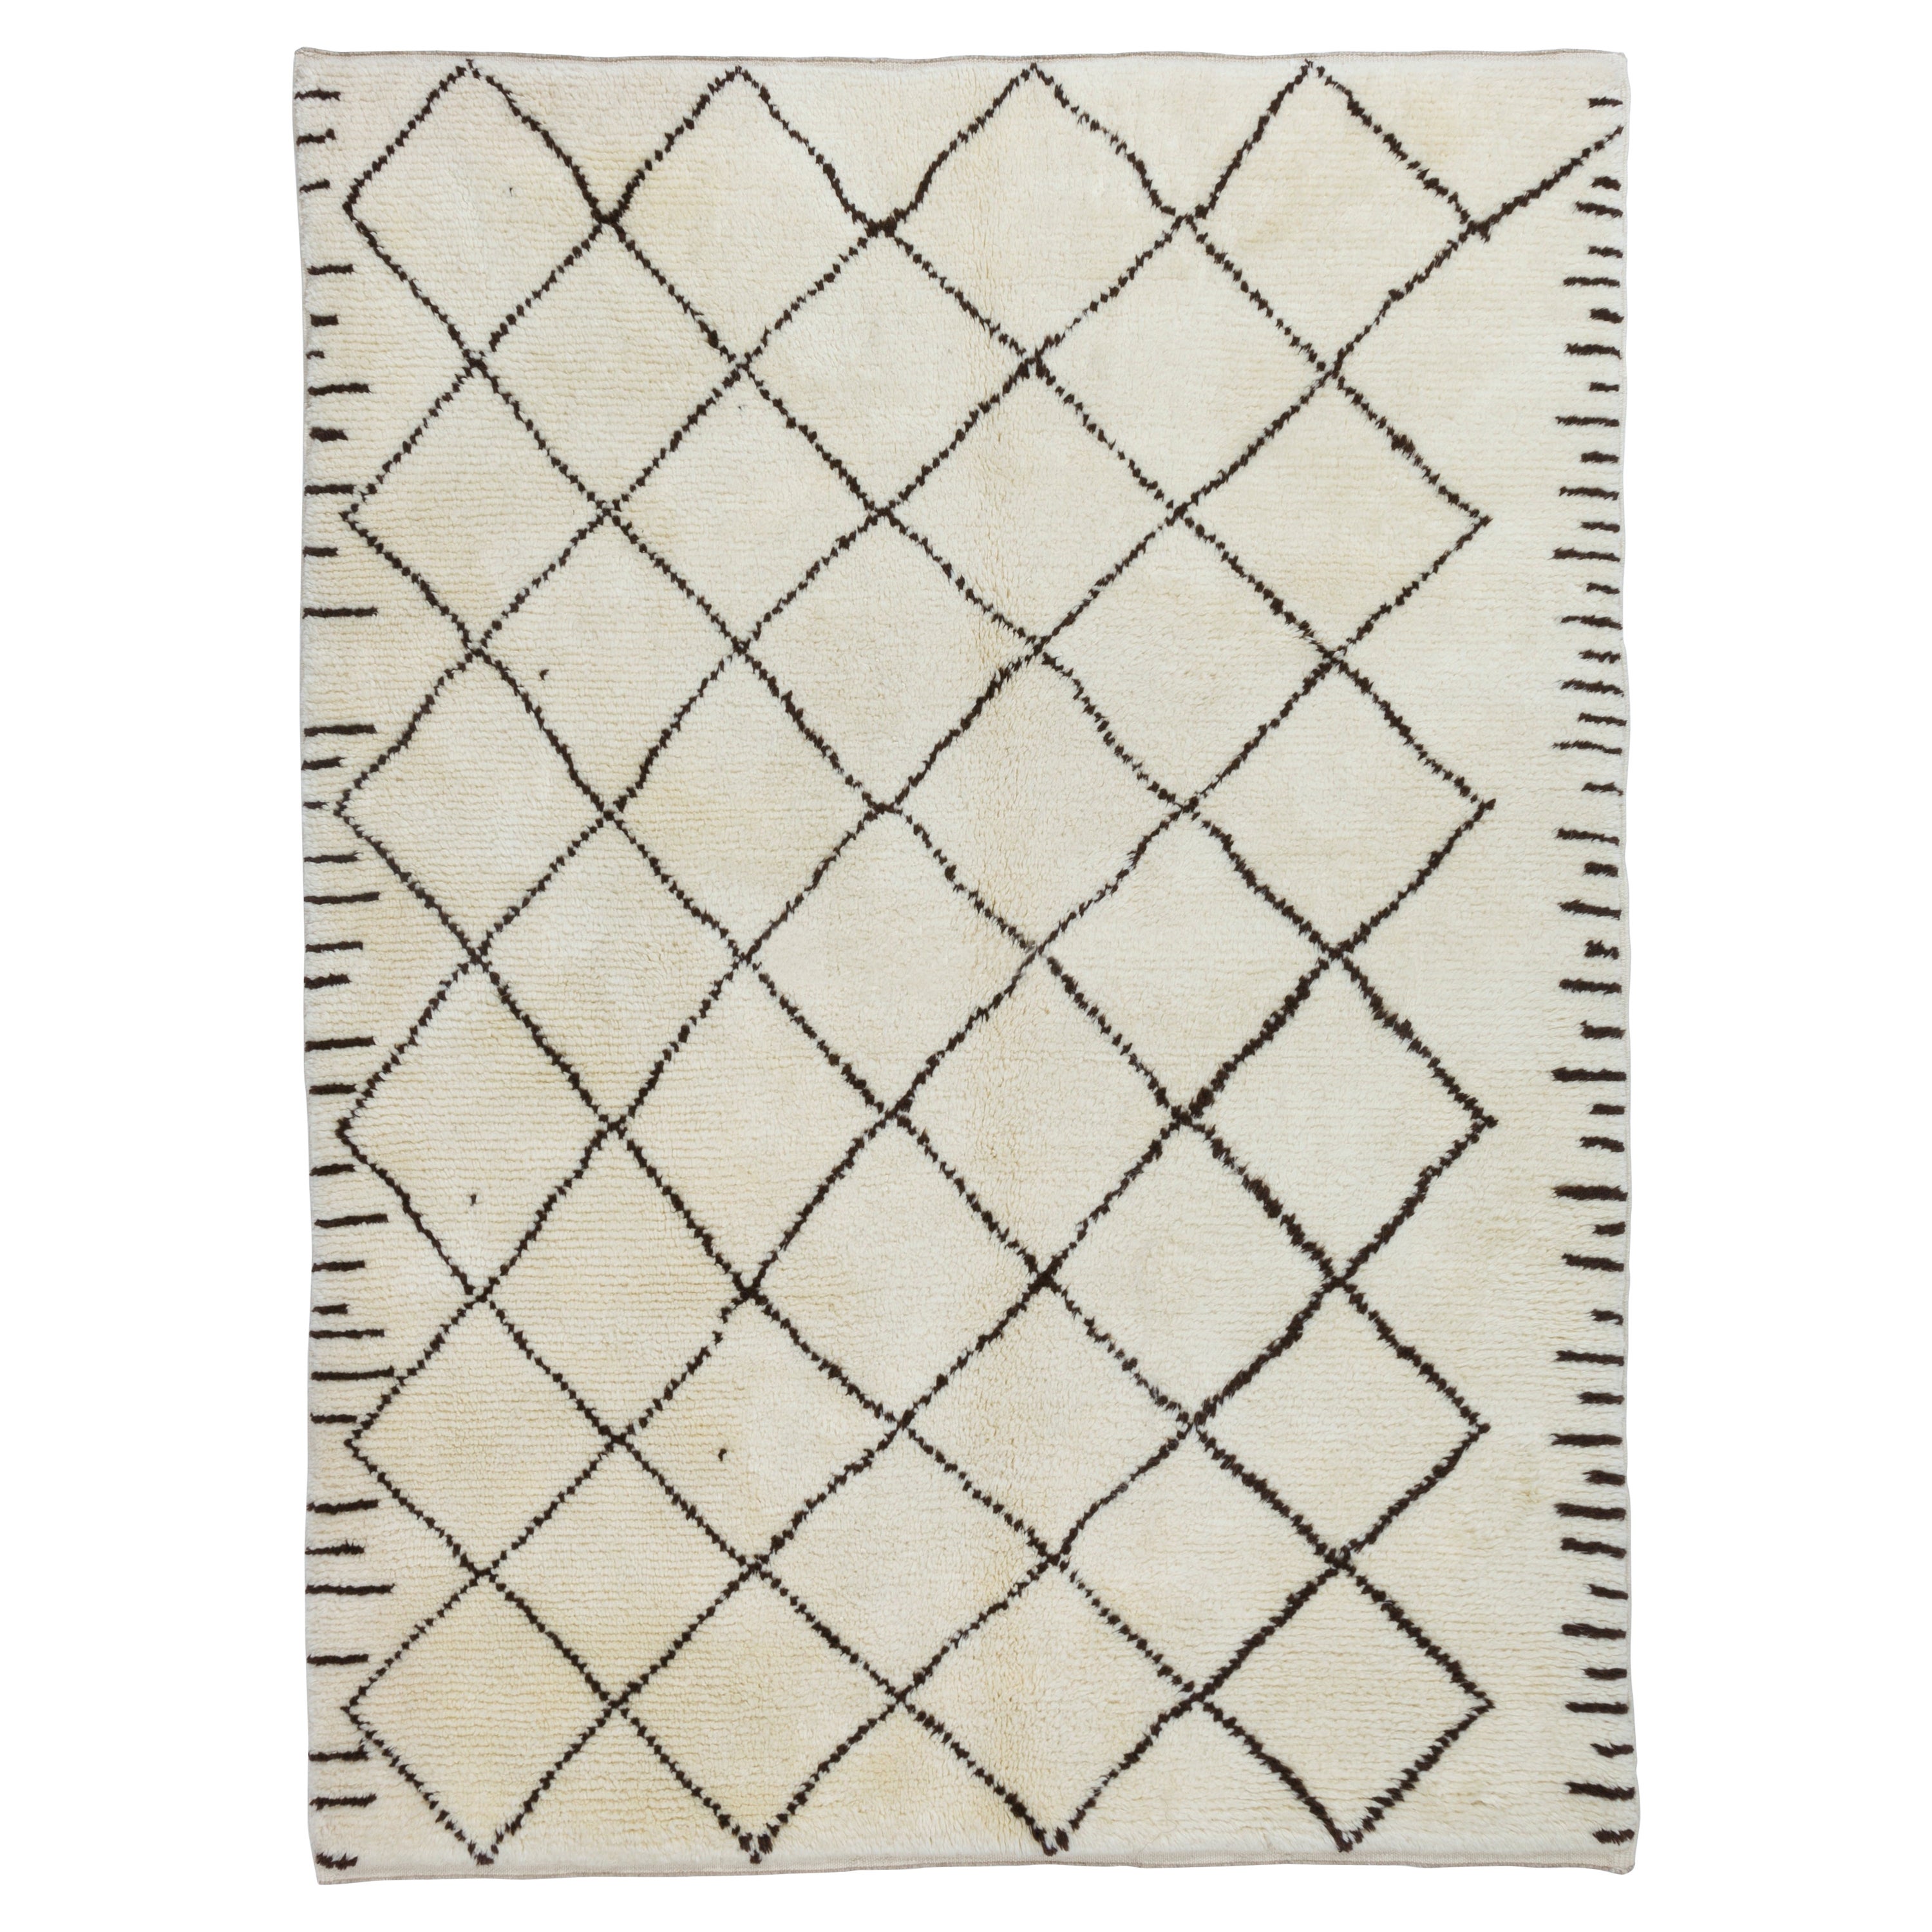 6x8 ft Modern Hand Knotted Moroccan Tulu Rug Made of Natural Ivory, Brown Wool